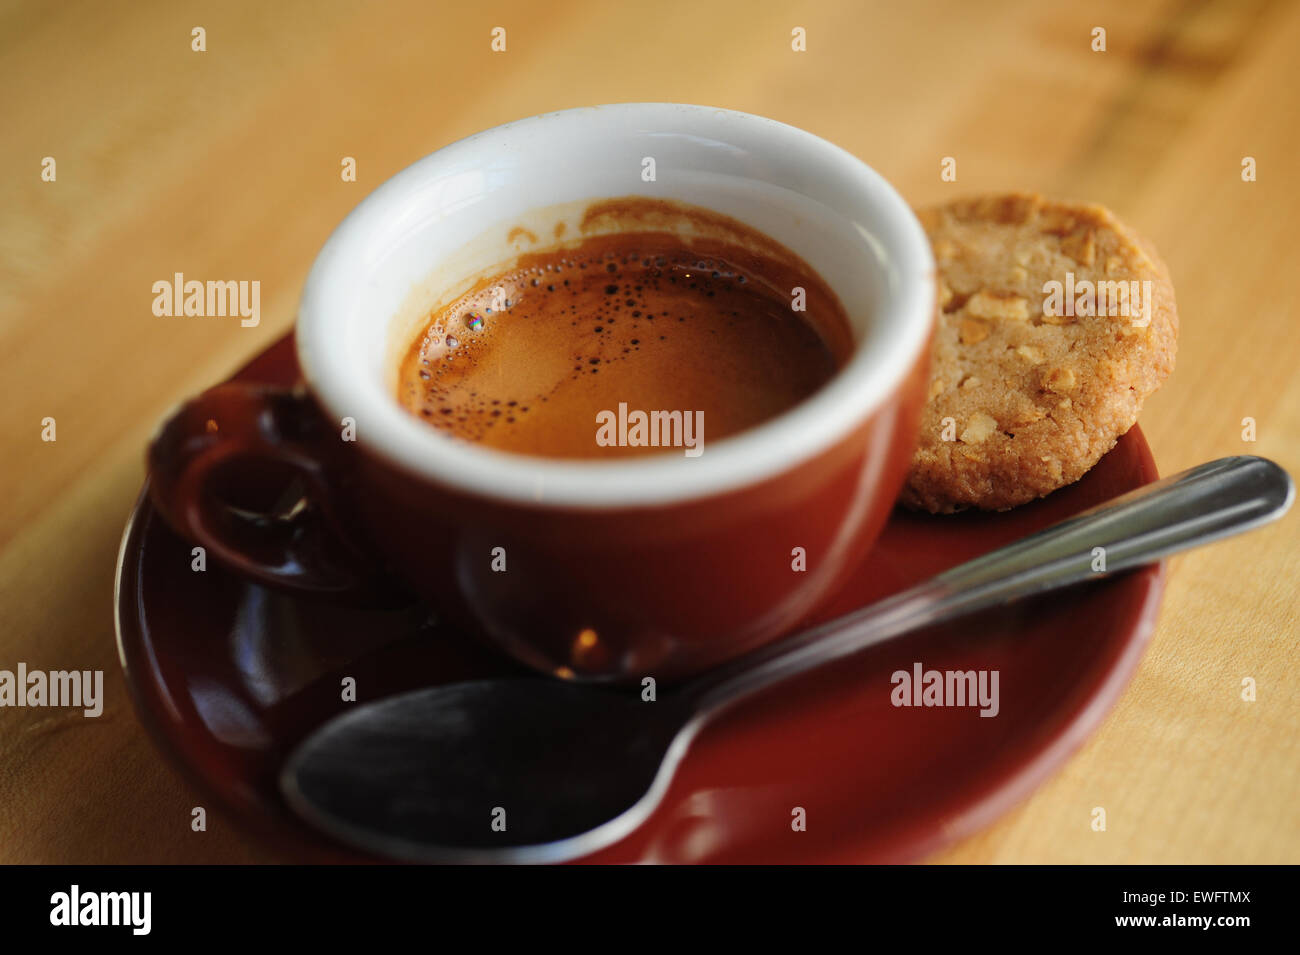 Food Coffee Cafe Espresso beverage served in a demitasse ceramic cup with cookie on the side Stock Photo